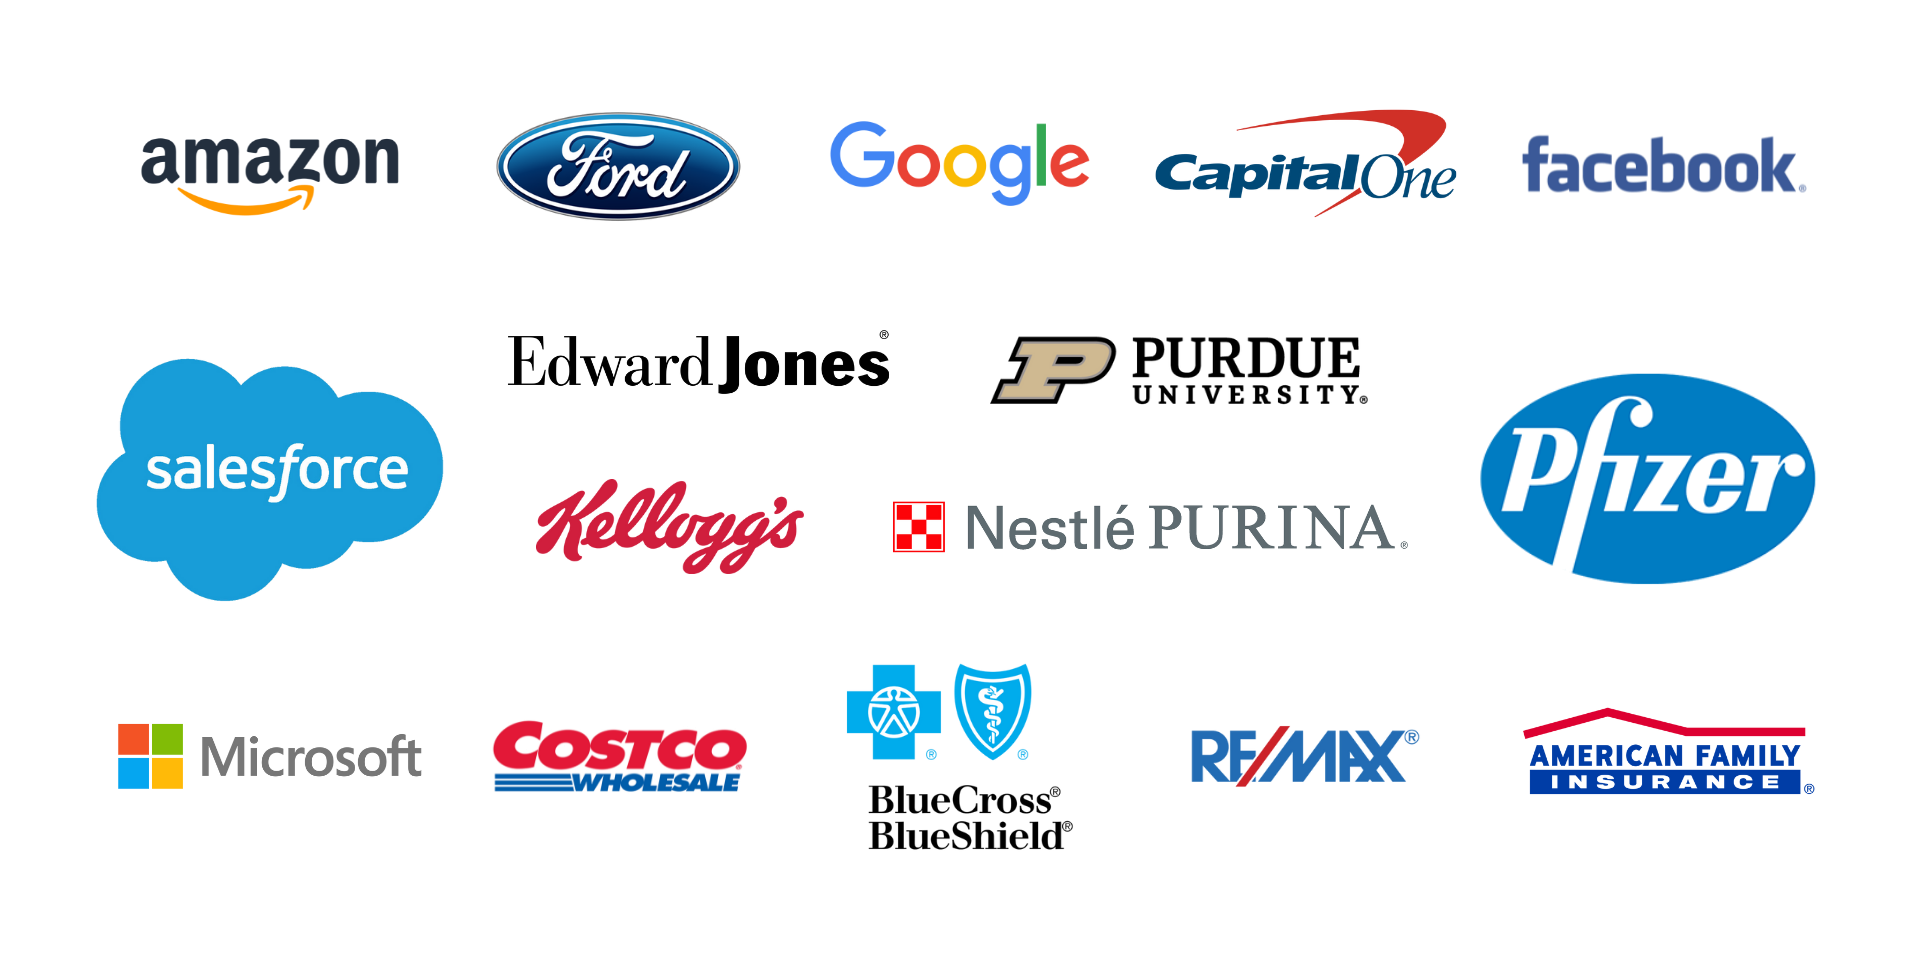 Some Clients we have worked with including Amazon, Ford, Google, Capitol One, Facebook, Salesforce, Edwards Jones, Kelloggs, Purdue, Purina, Pfizer, Microsoft, Costco, Blue Cross Blue Shield, ReMax, and American Family Insurance